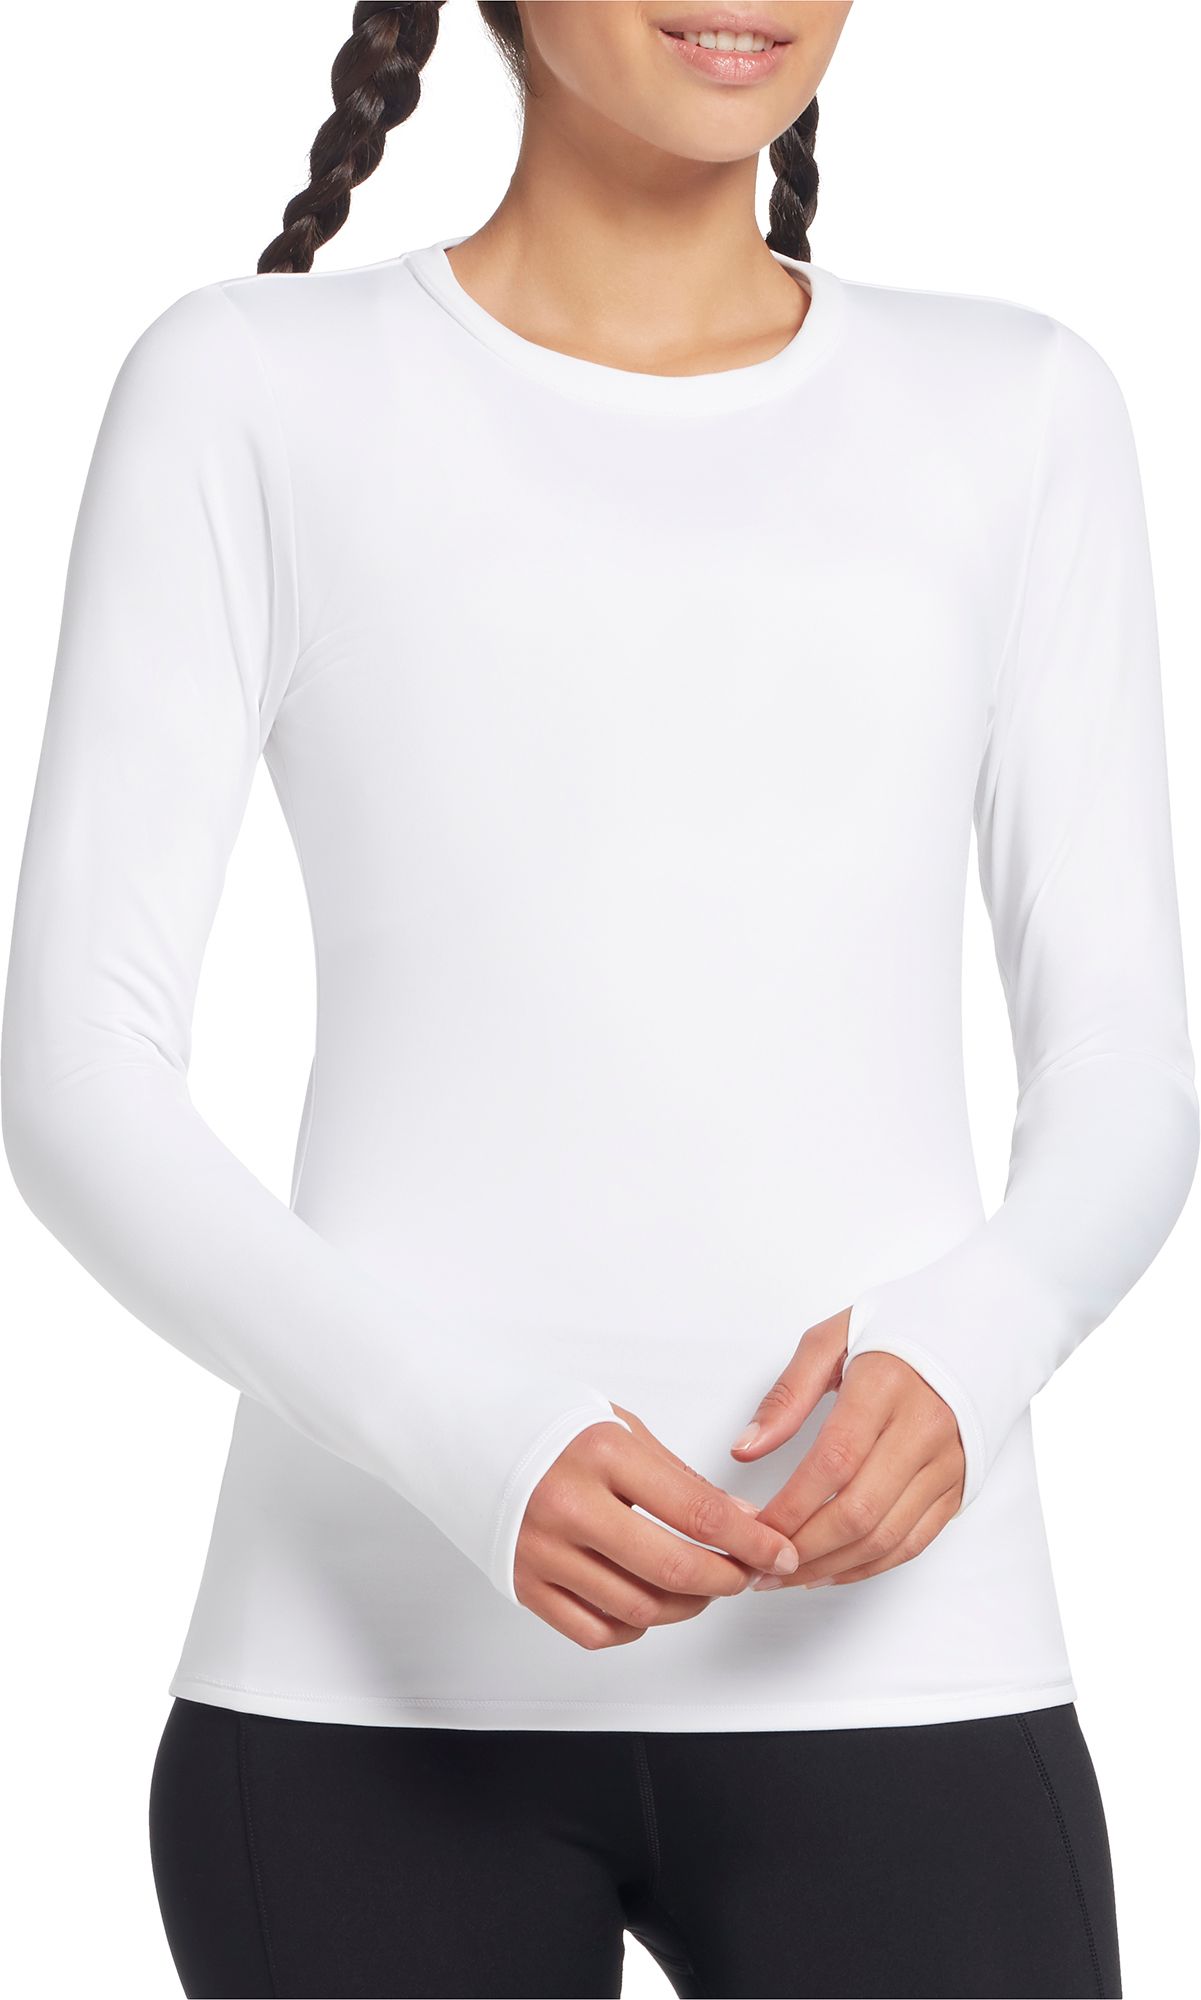 DSG Women's Cold Weather Compression Long Sleeve Shirt